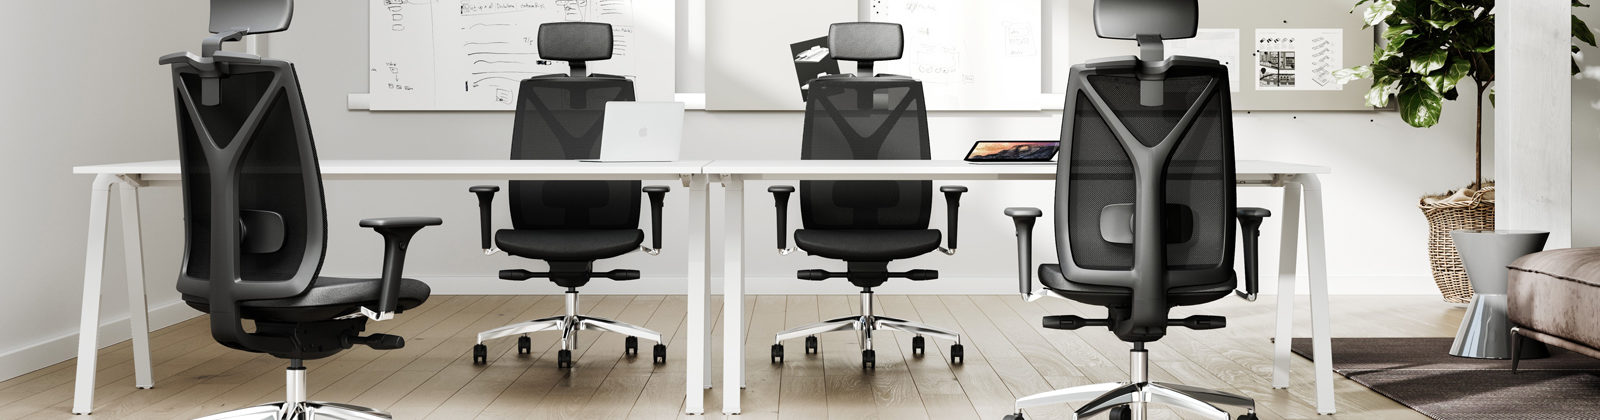 Modena task chairs at office bench desk